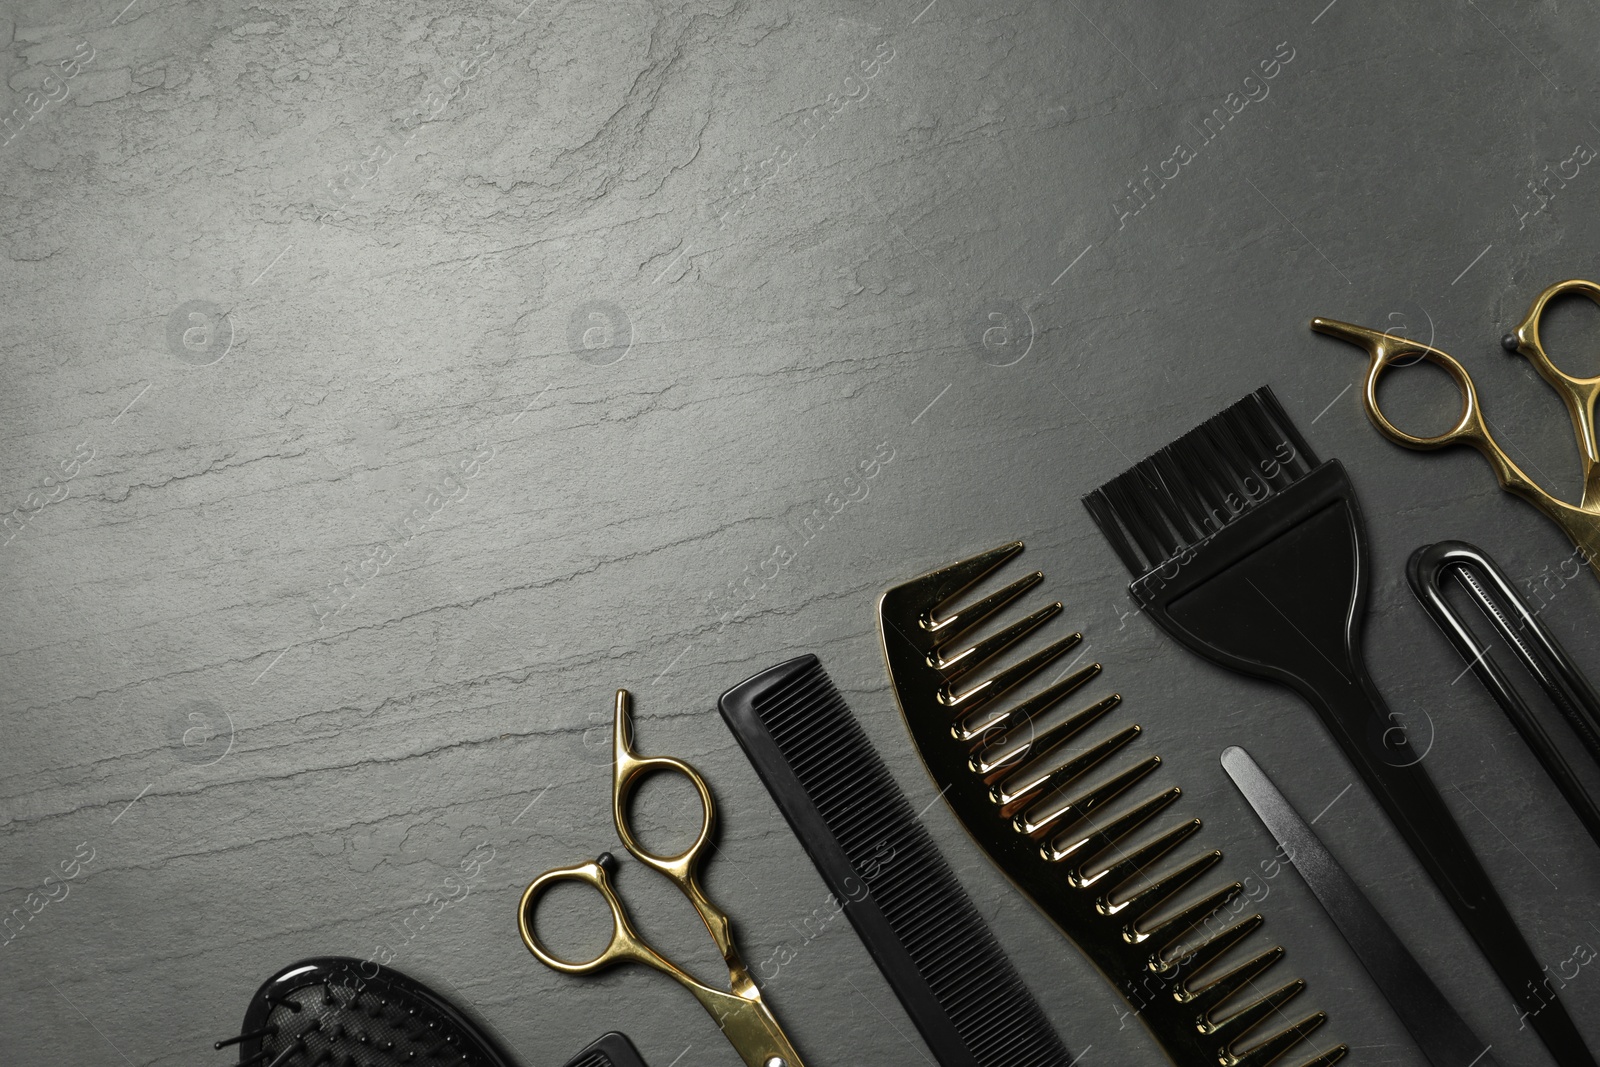 Photo of Hairdressing tools on grey textured background, flat lay. Space for text